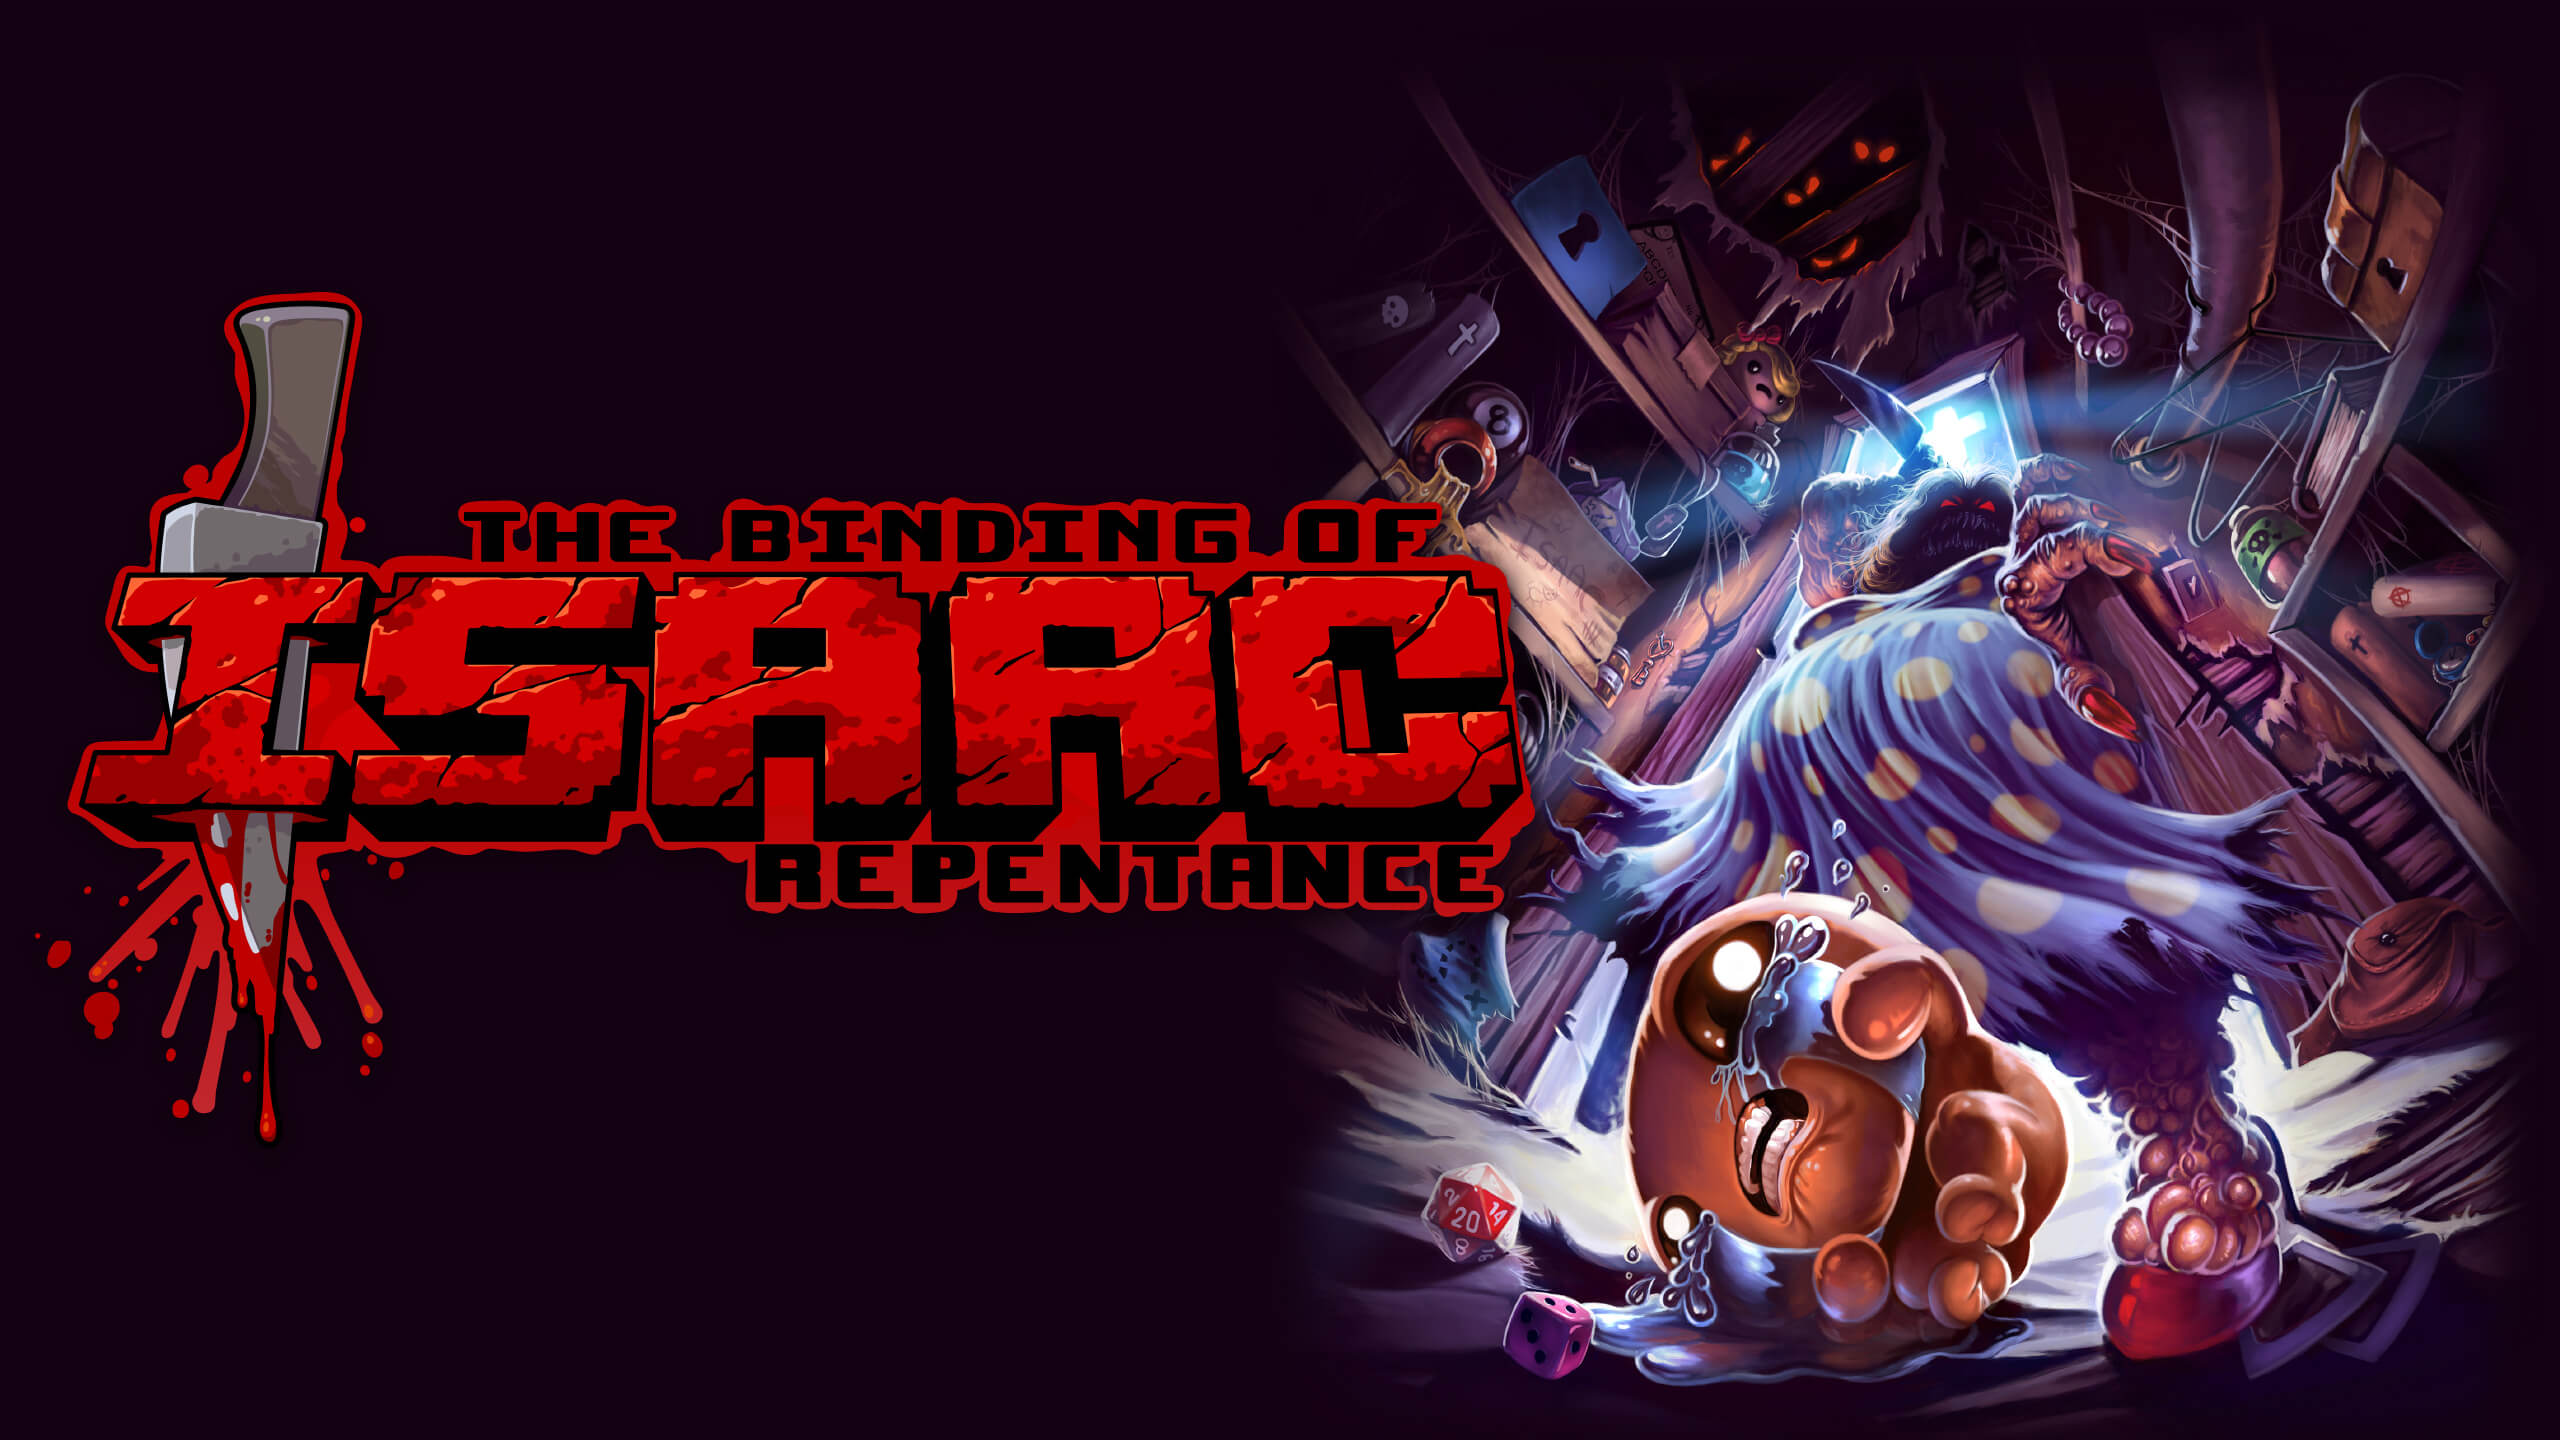 Isaac challenges